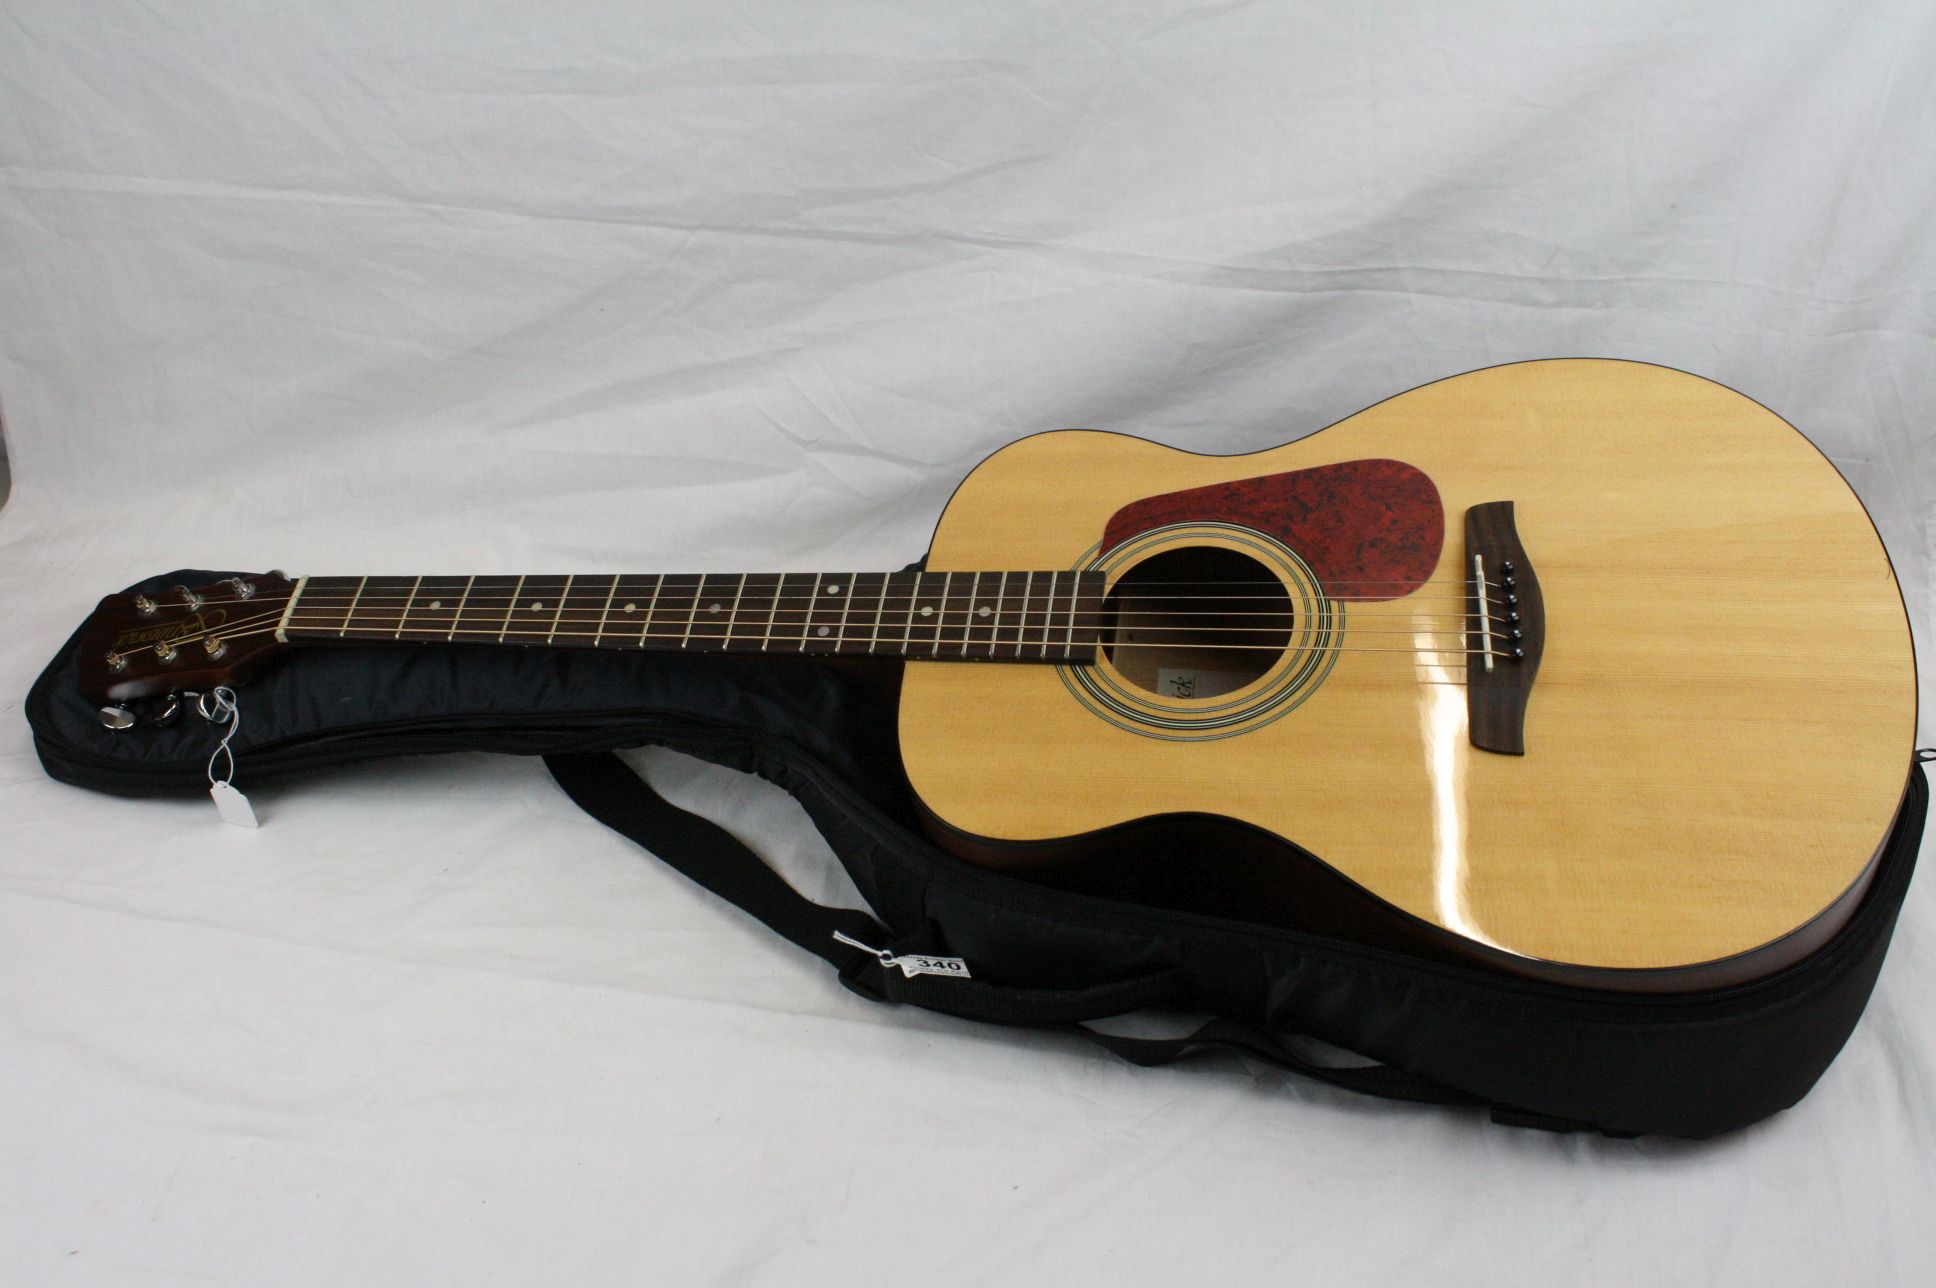 Guitar - A Brunswick BF200 acoustic guitar in natural finish, along with a gig bag. Good condition. - Image 2 of 6